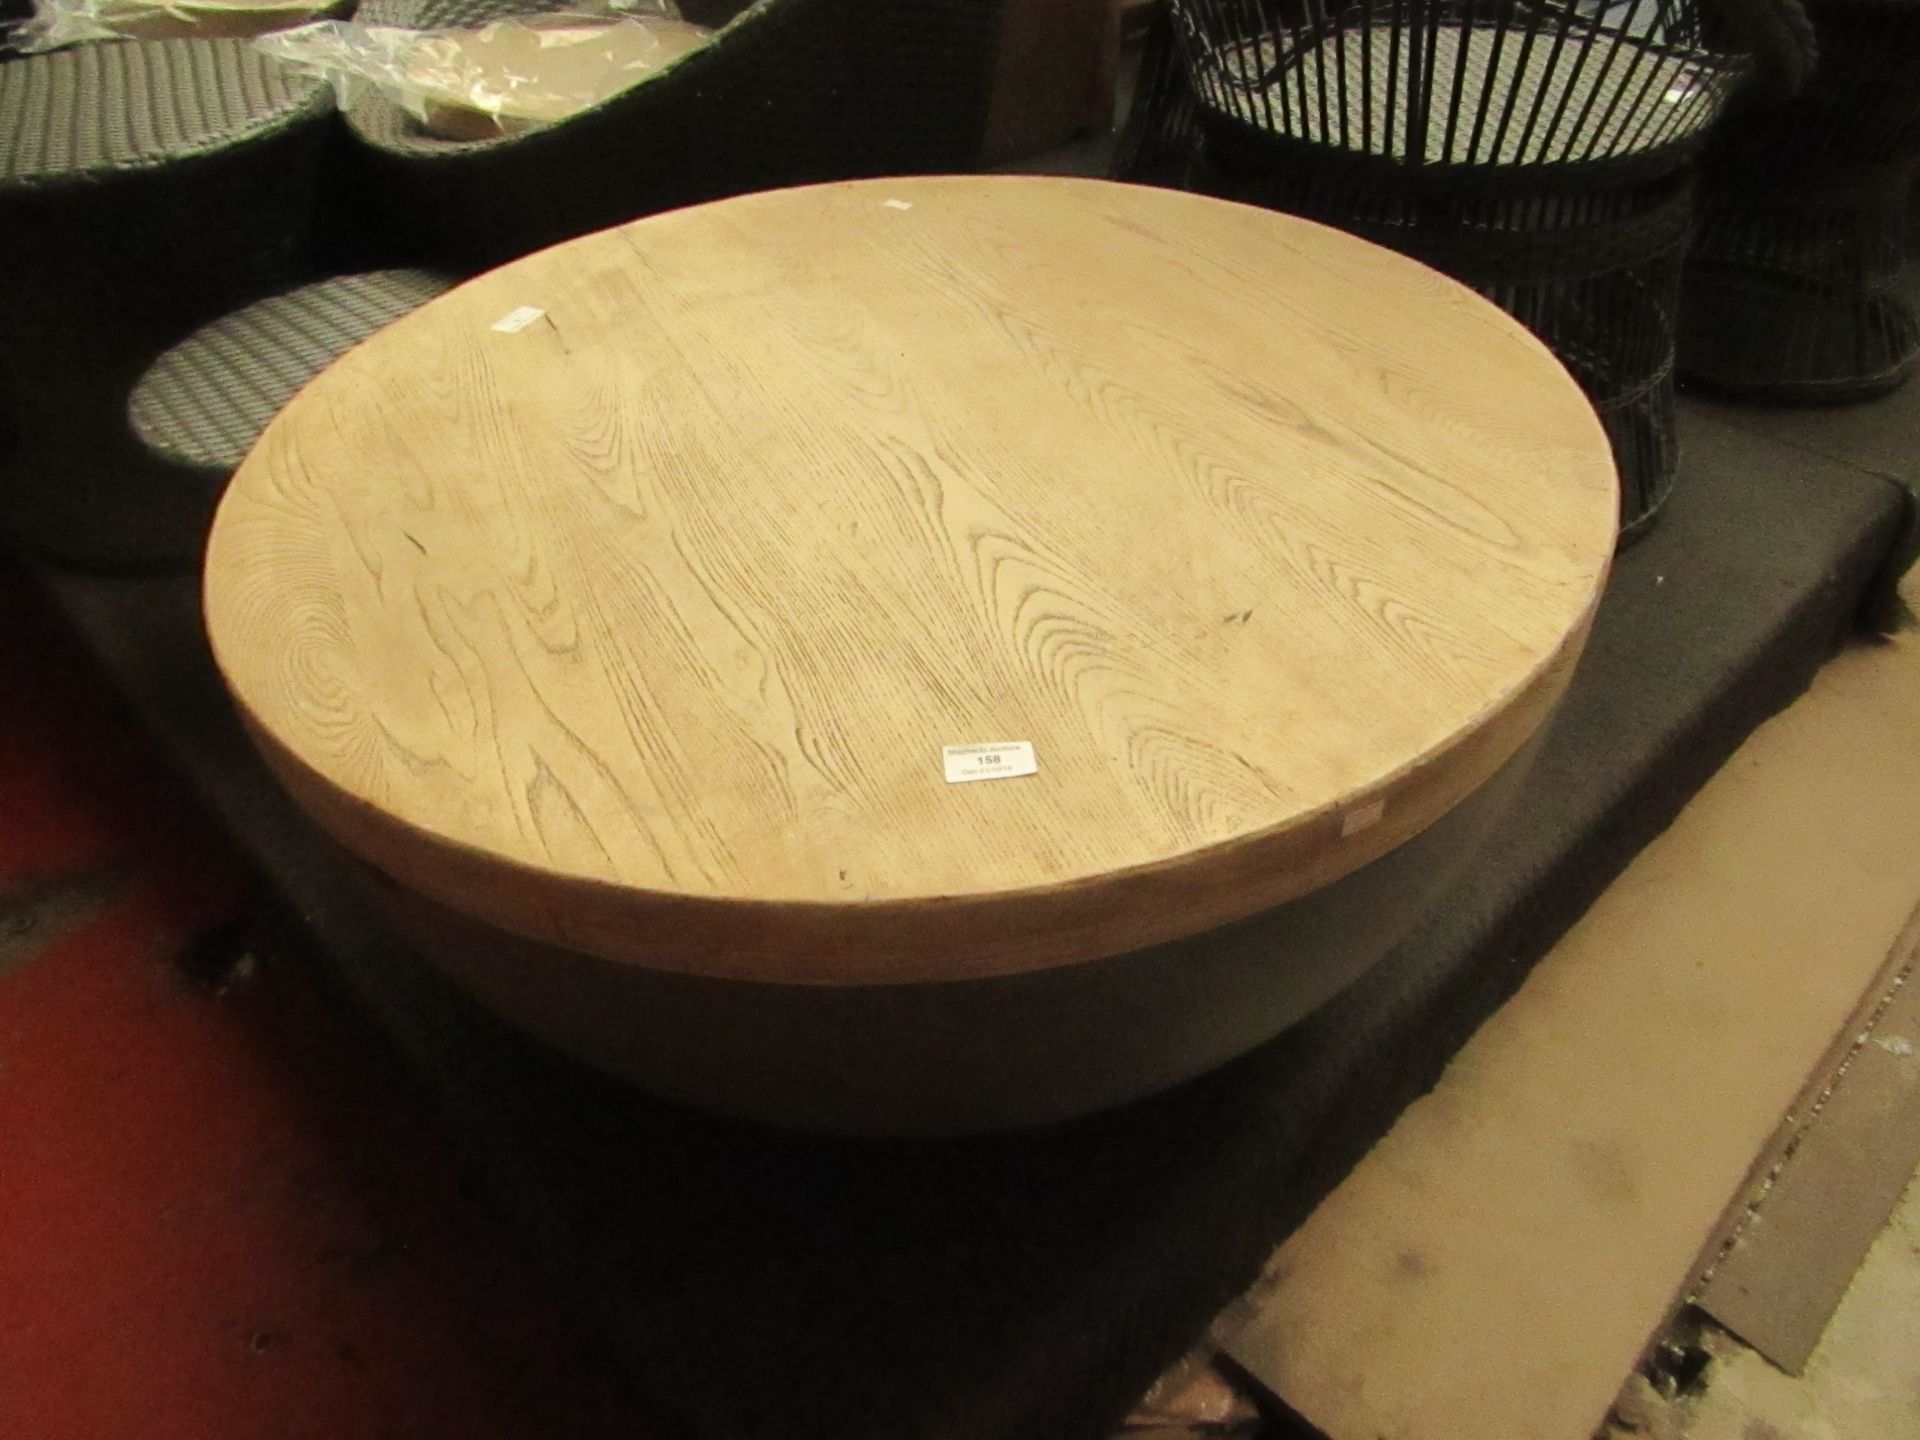 Large round wooden indoor/outdoor table, no major damage. Please note by Bidding on this item you